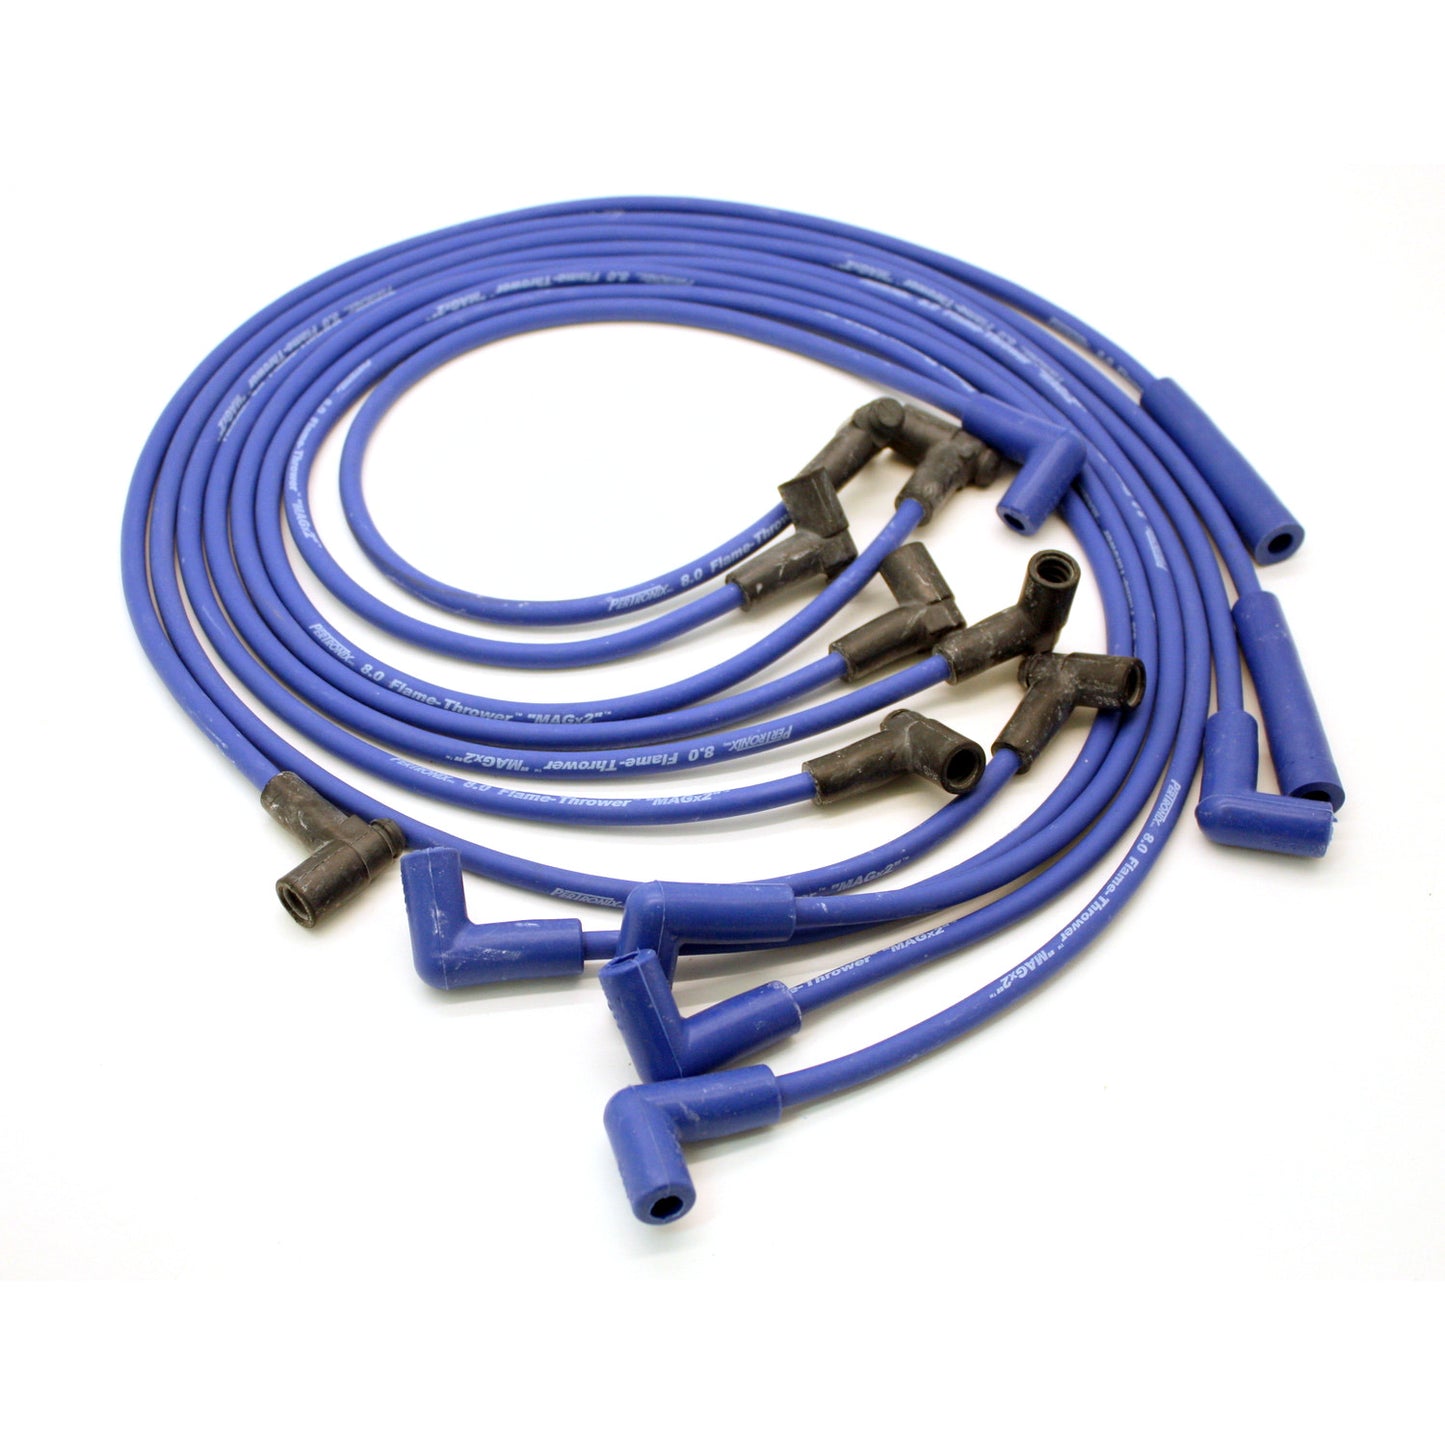 PerTronix 808308 Flame-Thrower Spark Plug Wires 8 cyl 8mm GM HEI Custom Fit Blue